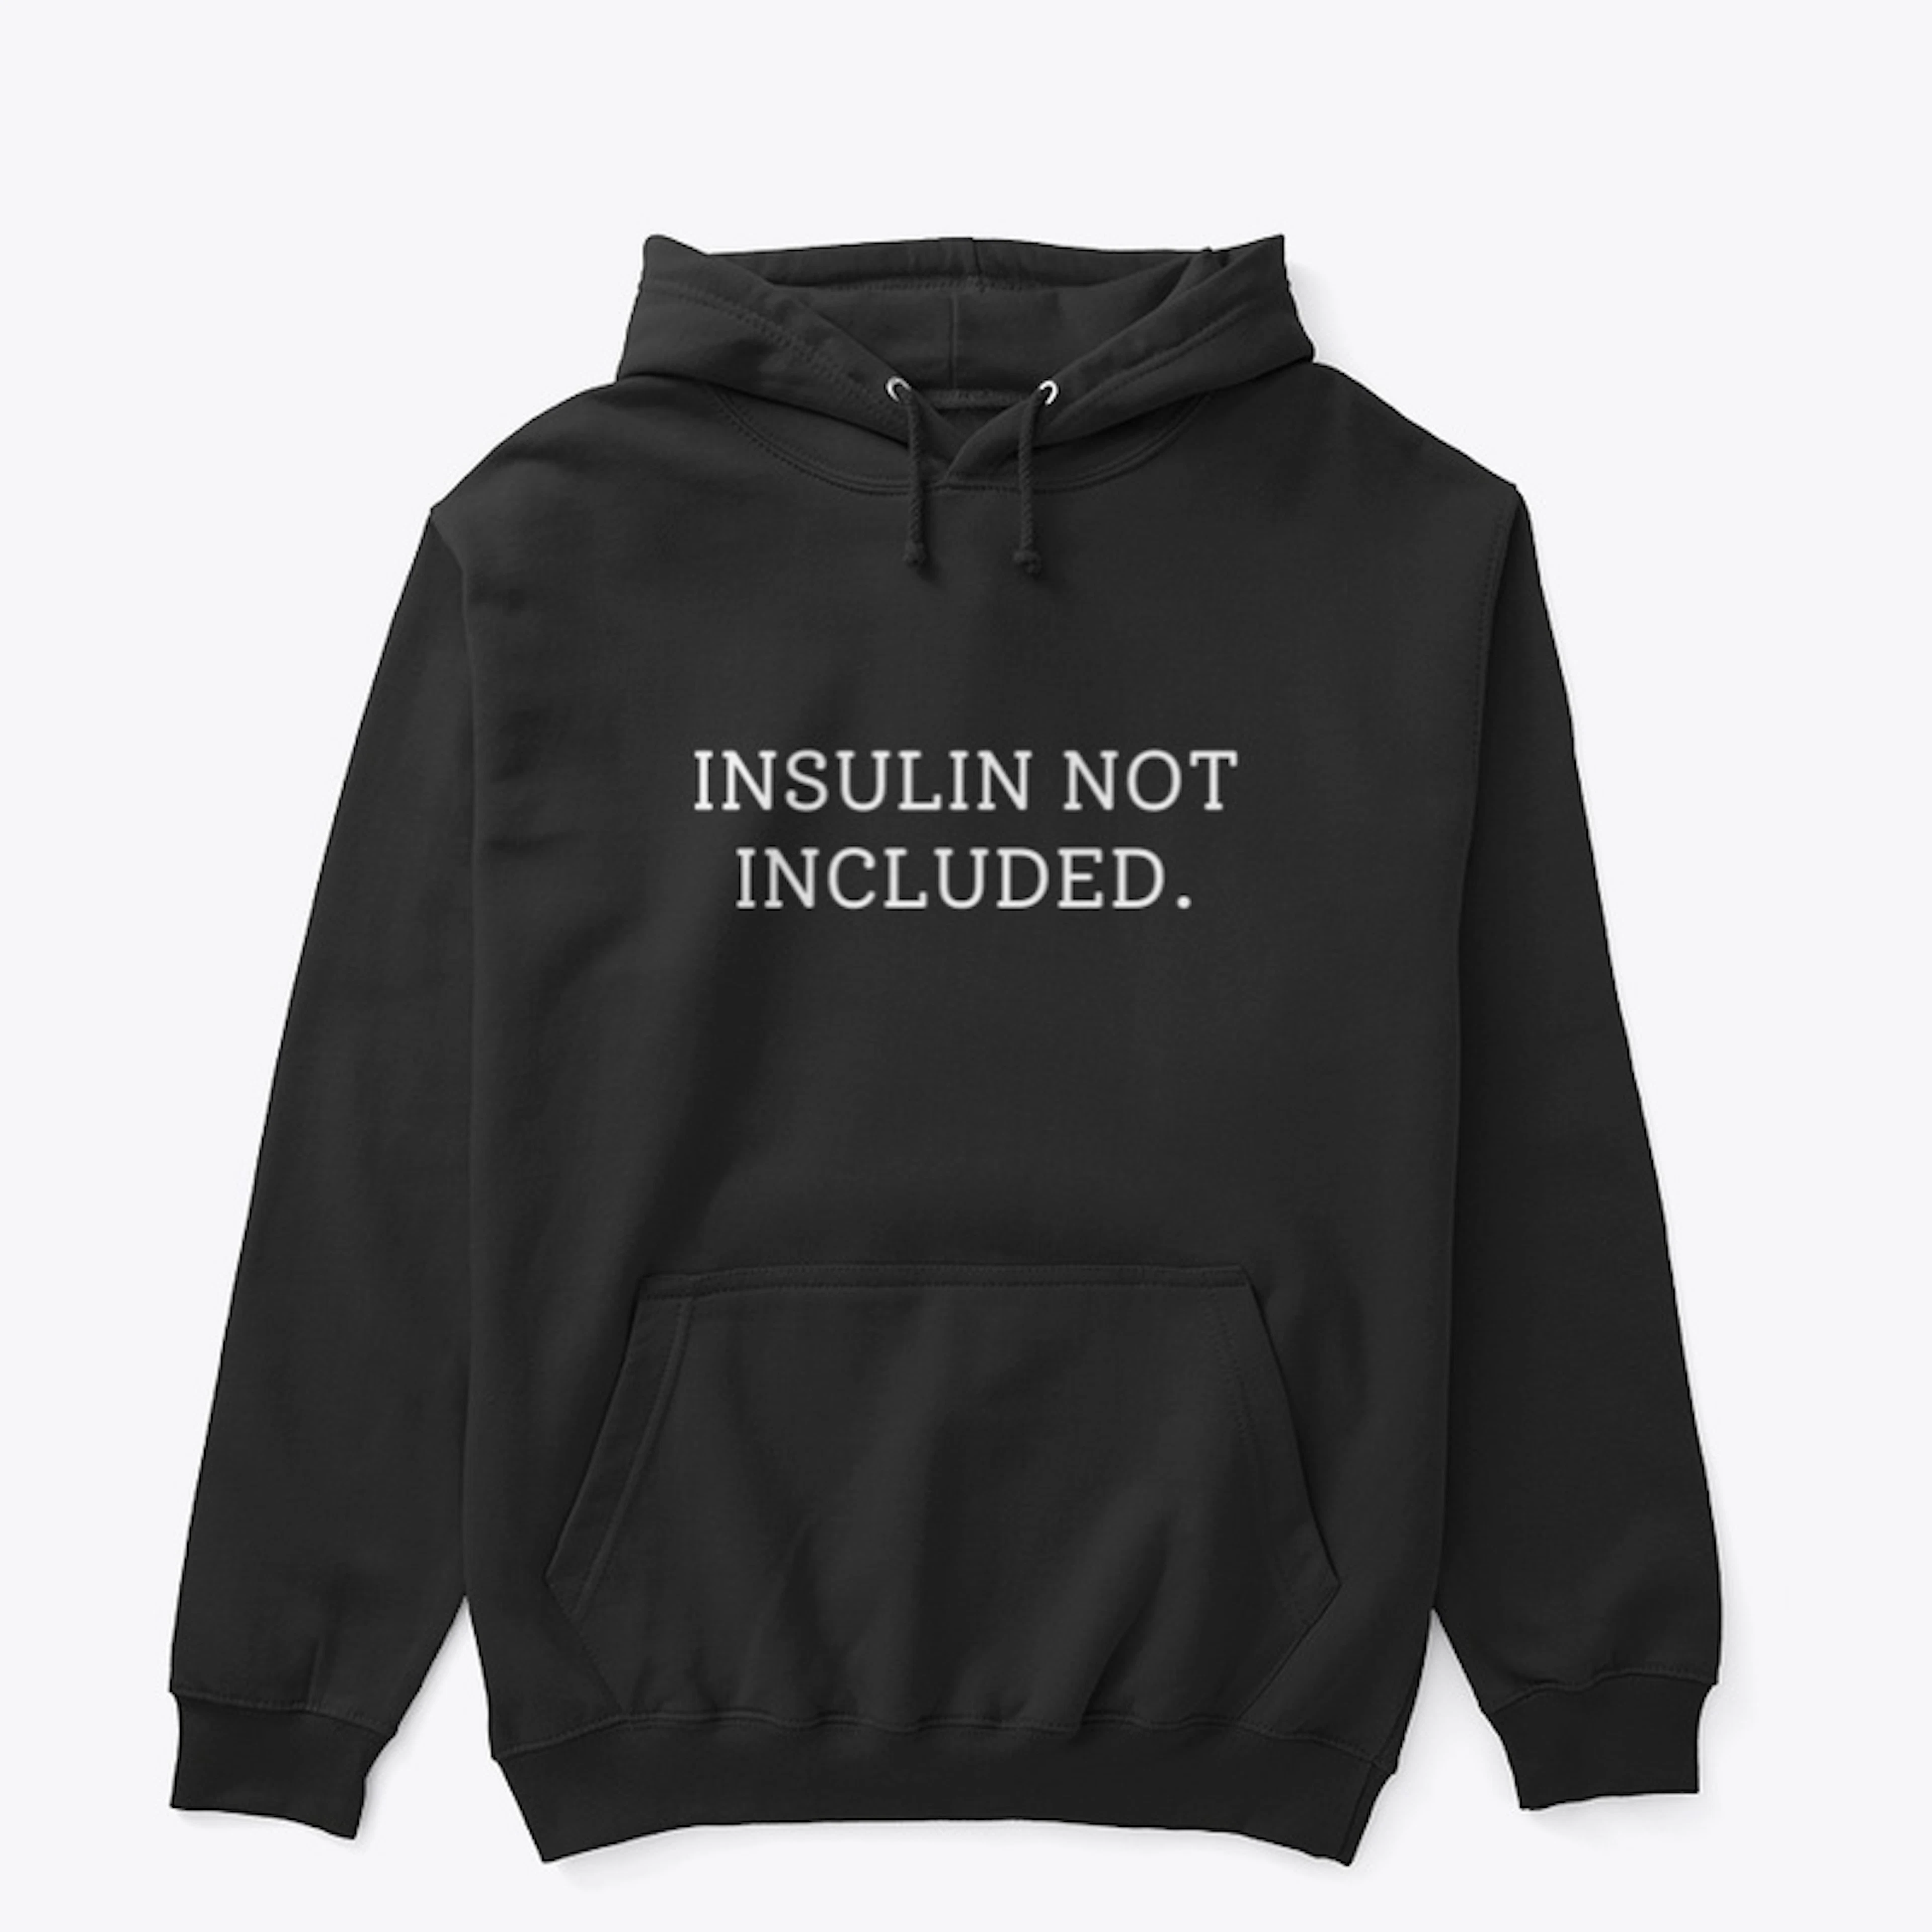 INSULIN NOT INCLUDED.